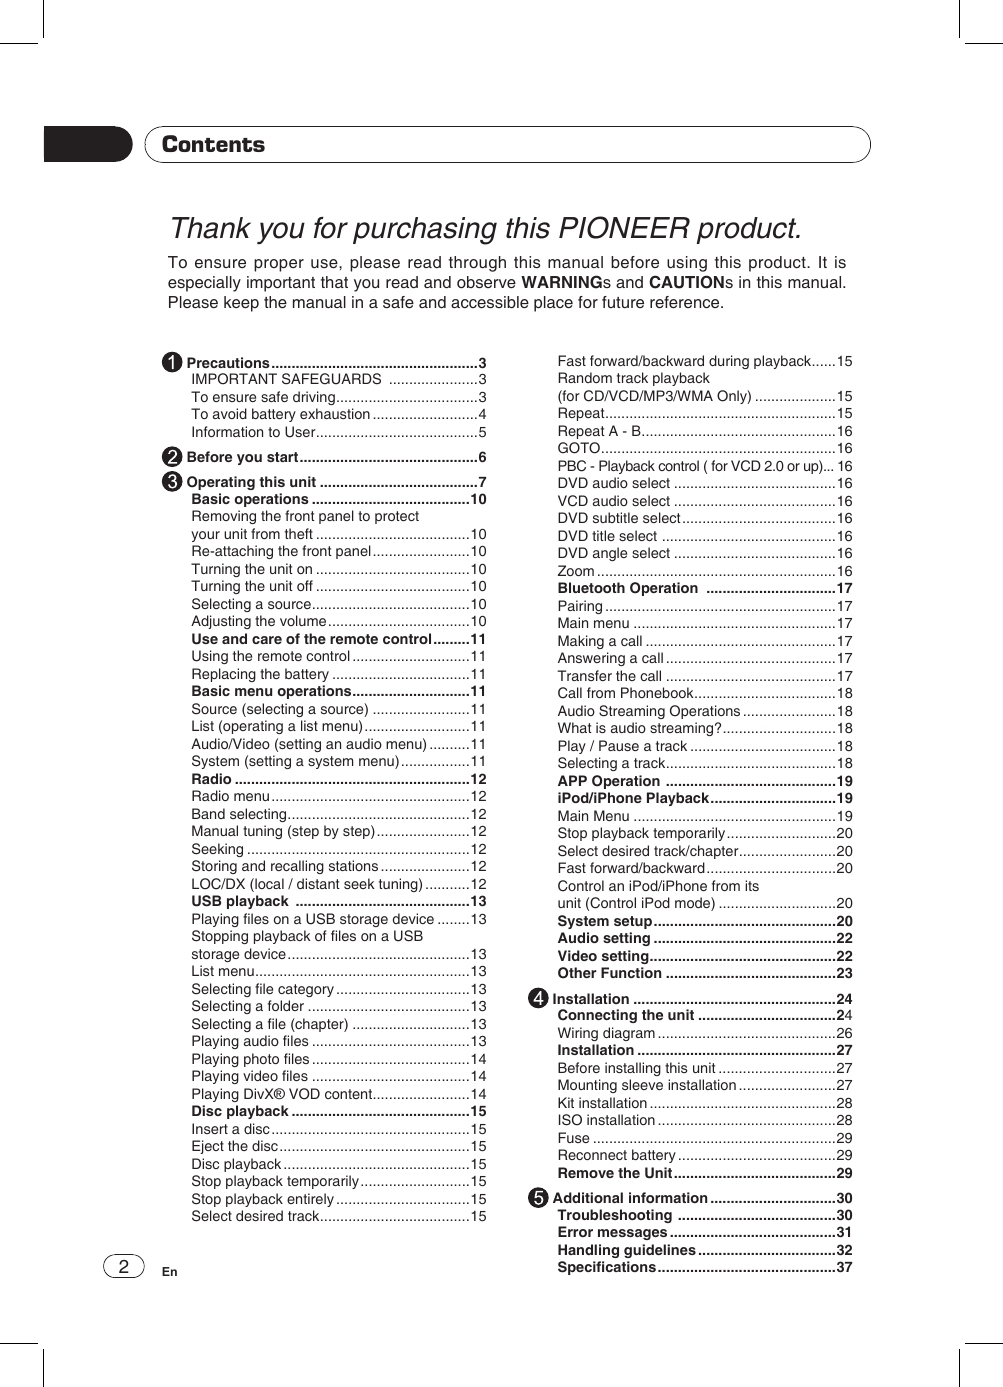 2EnThank you for purchasing this PIONEER product.To ensure proper use, please read through this manual before using this product. It is especially important that you read and observe WARNINGs and CAUTIONs in this manual. Please keep the manual in a safe and accessible place for future reference.Contents Precautions ...................................................3IMPORTANT SAFEGUARDS  ......................3To ensure safe driving ...................................3To avoid battery exhaustion ..........................4Information to User ........................................5 Before you start ............................................6 Operating this unit .......................................7Basic operations .......................................10Removing the front panel to protect your unit from theft ......................................10Re-attaching the front panel ........................10Turning the unit on ......................................10Turning the unit off ......................................10Selecting a source .......................................10Adjusting the volume ...................................10Use and care of the remote control .........11Using the remote control .............................11Replacing the battery ..................................11Basic menu operations .............................11Source (selecting a source) ........................11List (operating a list menu) ..........................11Audio/Video (setting an audio menu) ..........11System (setting a system menu) .................11Radio ..........................................................12Radio menu .................................................12Band selecting .............................................12Manual tuning (step by step) .......................12Seeking .......................................................12Storing and recalling stations ......................12LOC/DX (local / distant seek tuning) ...........12USB playback  ...........................................13Playing les on a USB storage device ........13Stopping playback of les on a USB storage device .............................................13List menu .....................................................13Selecting le category .................................13Selecting a folder ........................................13Selecting a le (chapter) .............................13Playing audio les .......................................13Playing photo les .......................................14Playing video les .......................................14Playing DivX® VOD content ........................14Disc playback ............................................15Insert a disc .................................................15Eject the disc ...............................................15Disc playback ..............................................15Stop playback temporarily ...........................15Stop playback entirely .................................15Select desired track .....................................15Fast forward/backward during playback ......15Random track playback(for CD/VCD/MP3/WMA Only) ....................15Repeat .........................................................15Repeat A - B ................................................16GOTO ..........................................................16PBC - Playback control ( for VCD 2.0 or up)... 16DVD audio select ........................................16VCD audio select ........................................16DVD subtitle select ......................................16DVD title select  ...........................................16DVD angle select ........................................16Zoom ...........................................................16Bluetooth Operation  ................................17Pairing .........................................................17Main menu ..................................................17Making a call ...............................................17Answering a call ..........................................17Transfer the call ..........................................17Call from Phonebook ...................................18Audio Streaming Operations .......................18What is audio streaming? ............................18Play / Pause a track ....................................18Selecting a track ..........................................18APP Operation  ..........................................19iPod/iPhone Playback ...............................19Main Menu ..................................................19Stop playback temporarily ...........................20Select desired track/chapter ........................20Fast forward/backward ................................20Control an iPod/iPhone from its unit (Control iPod mode) .............................20System setup .............................................20Audio setting .............................................22Video setting ..............................................22Other Function ..........................................23 Installation ..................................................24Connecting the unit ..................................24Wiring diagram ............................................26Installation .................................................27Before installing this unit .............................27Mounting sleeve installation ........................27Kit installation ..............................................28ISO installation ............................................28Fuse ............................................................29Reconnect battery .......................................29Remove the Unit ........................................29 Additional information ...............................30Troubleshooting  .......................................30Error messages .........................................31Handling guidelines ..................................32Specications ............................................37